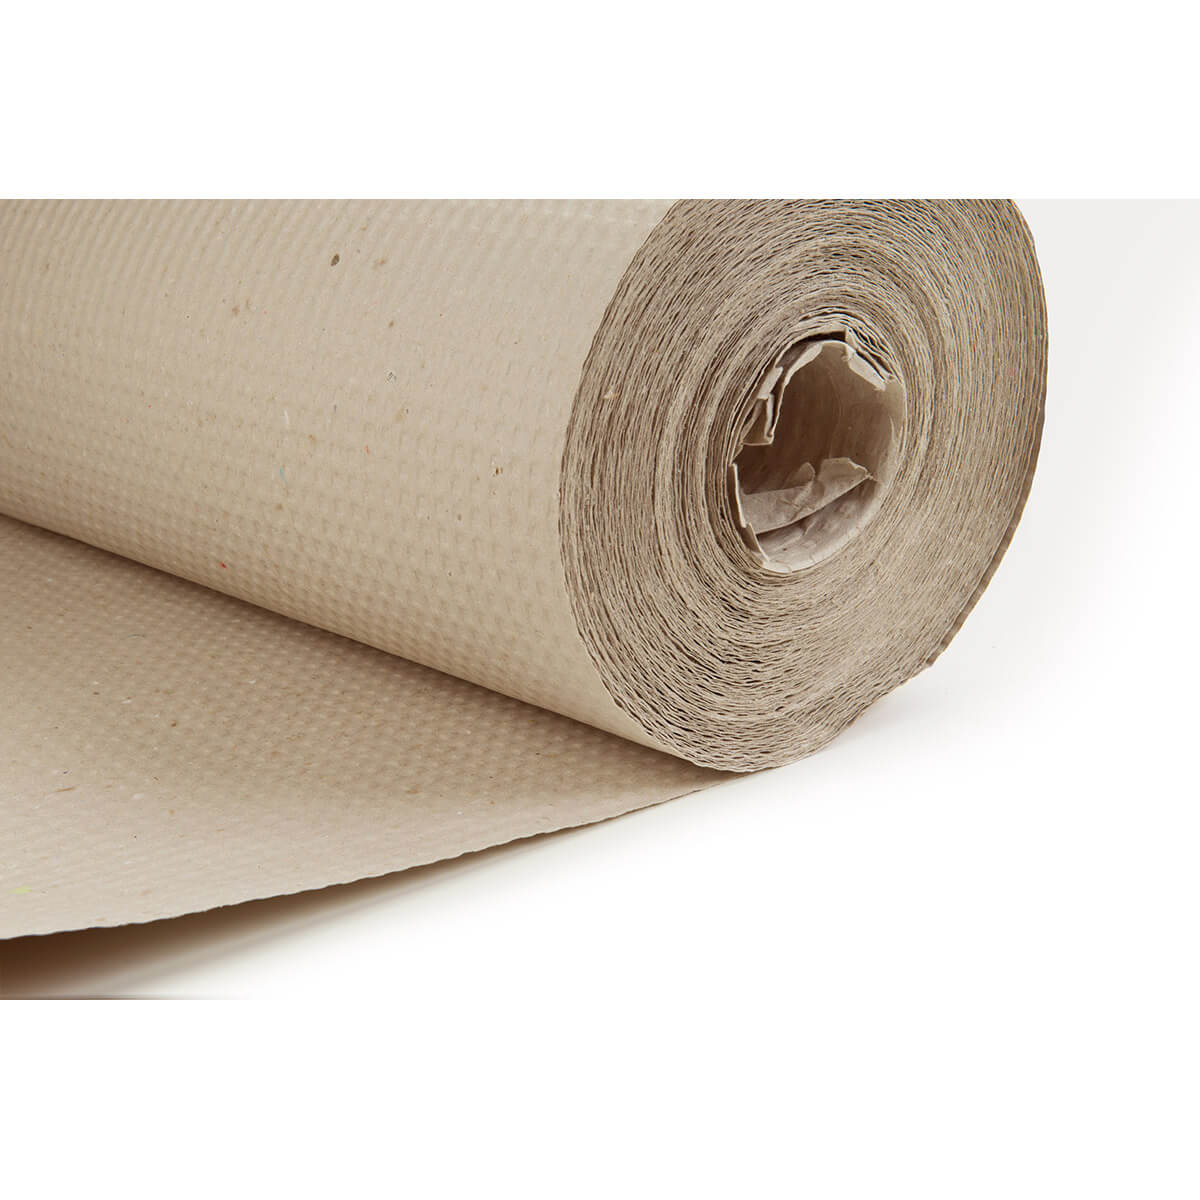 Padding paper 130 g|m² packing paper on roll 50 cm x 70 m packing material